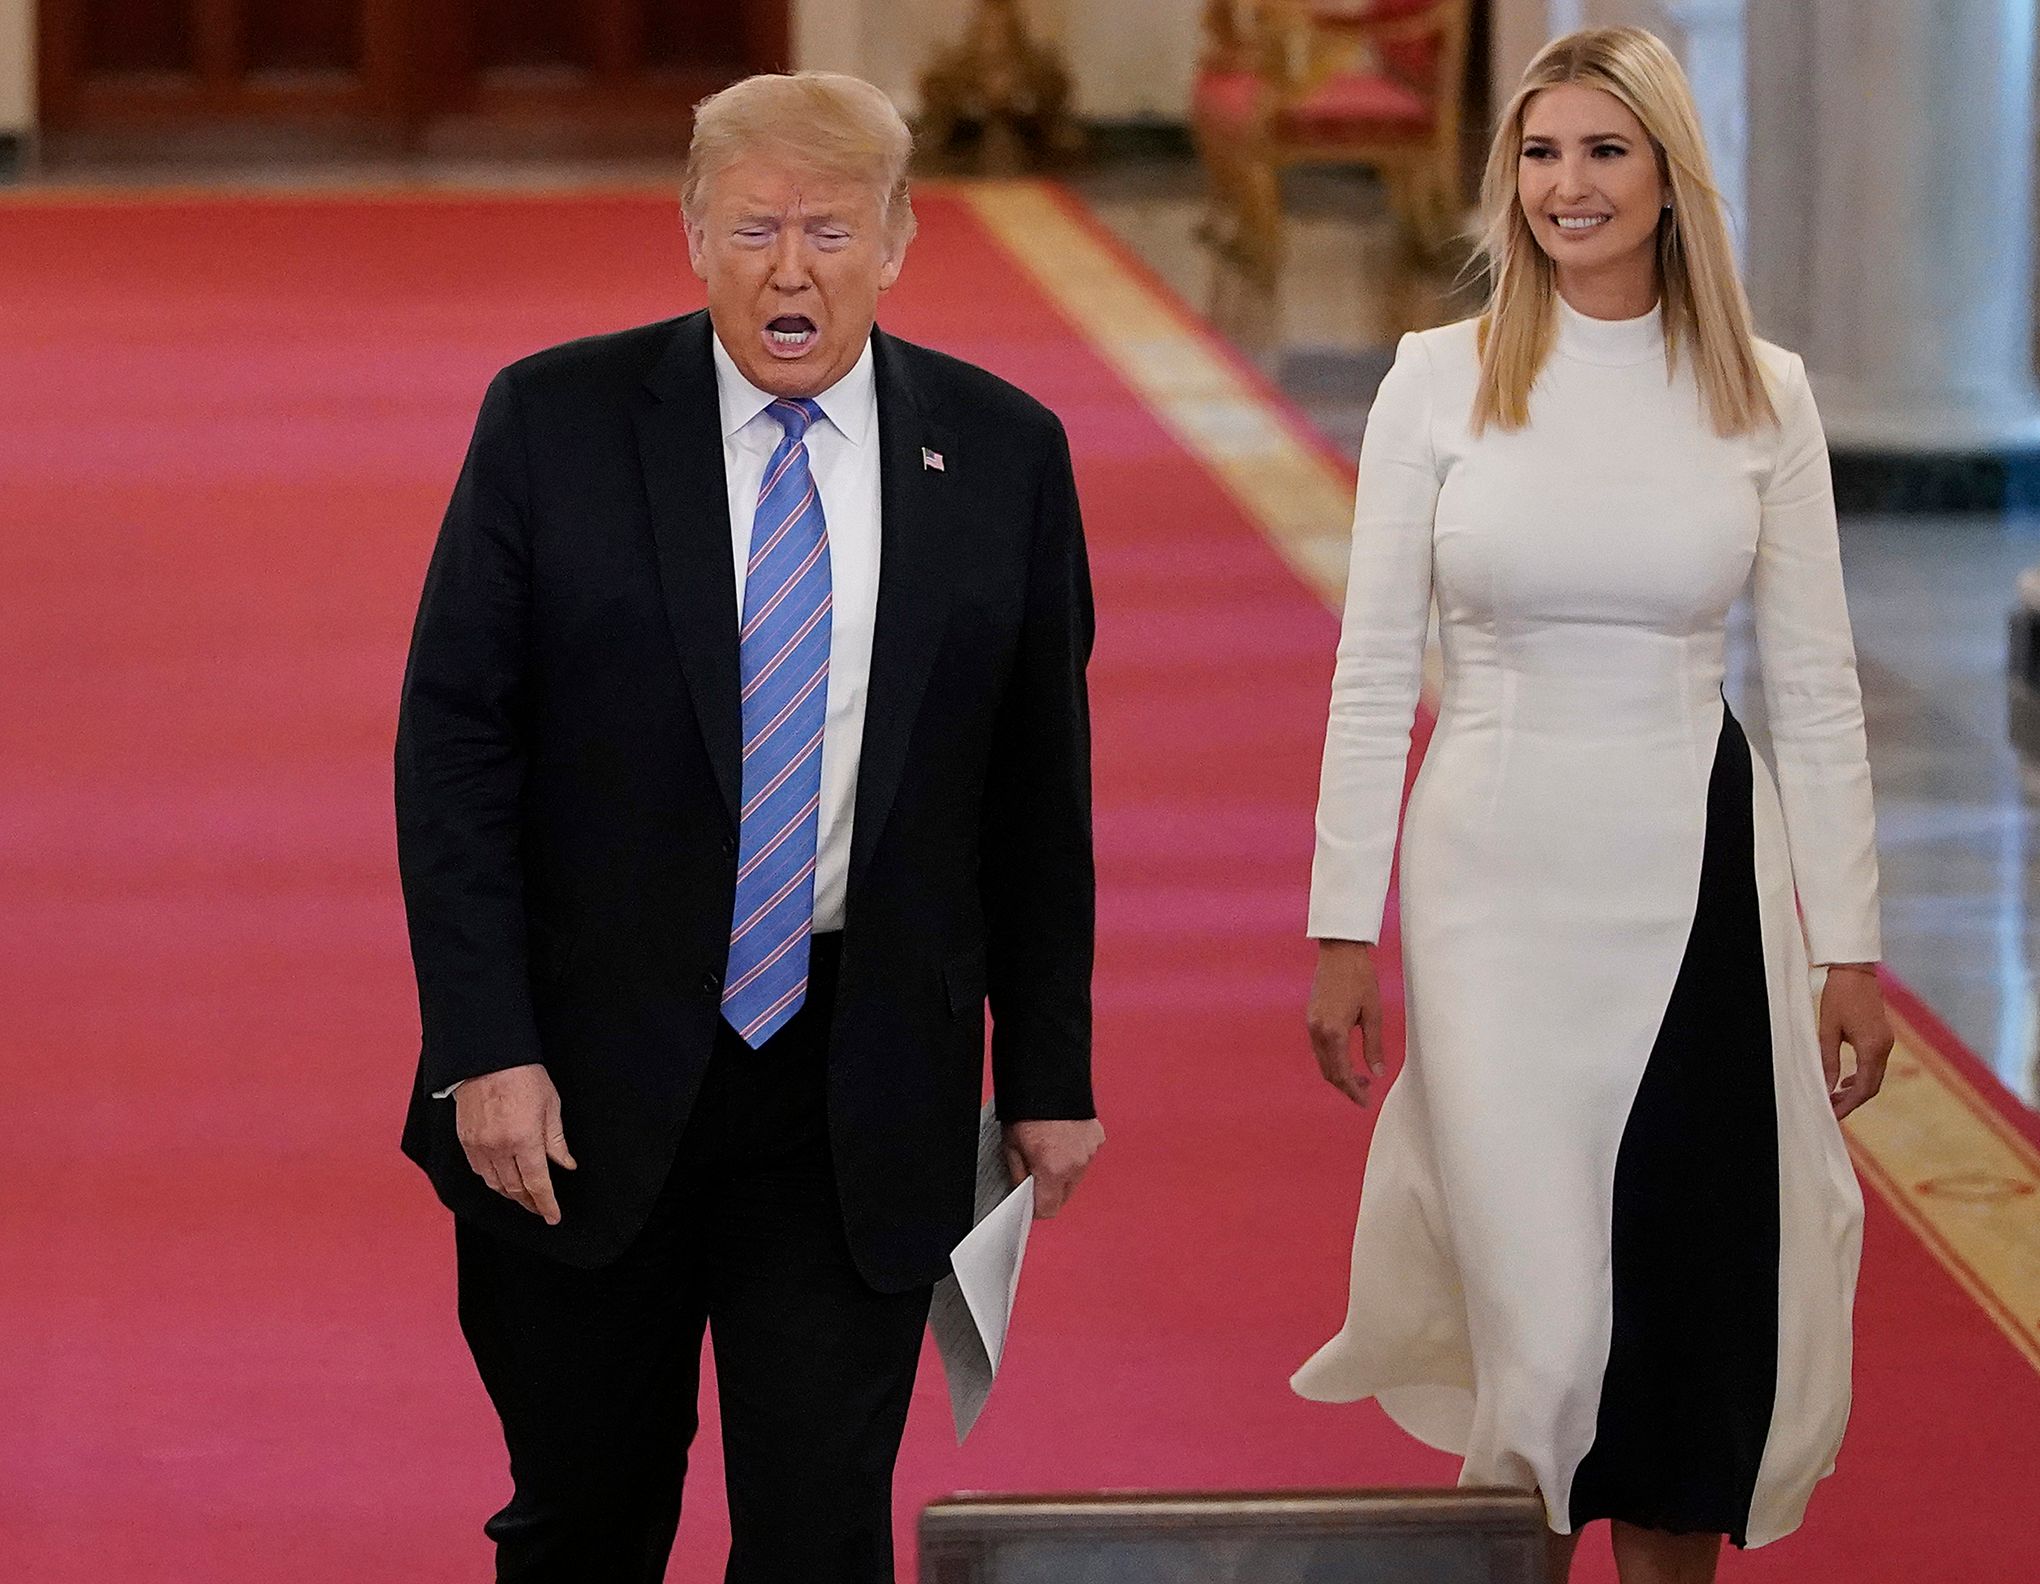 Hot Secretary Forced - Trump's lewd talk about daughter Ivanka in front of White House staff  recalled in new book | The Seattle Times